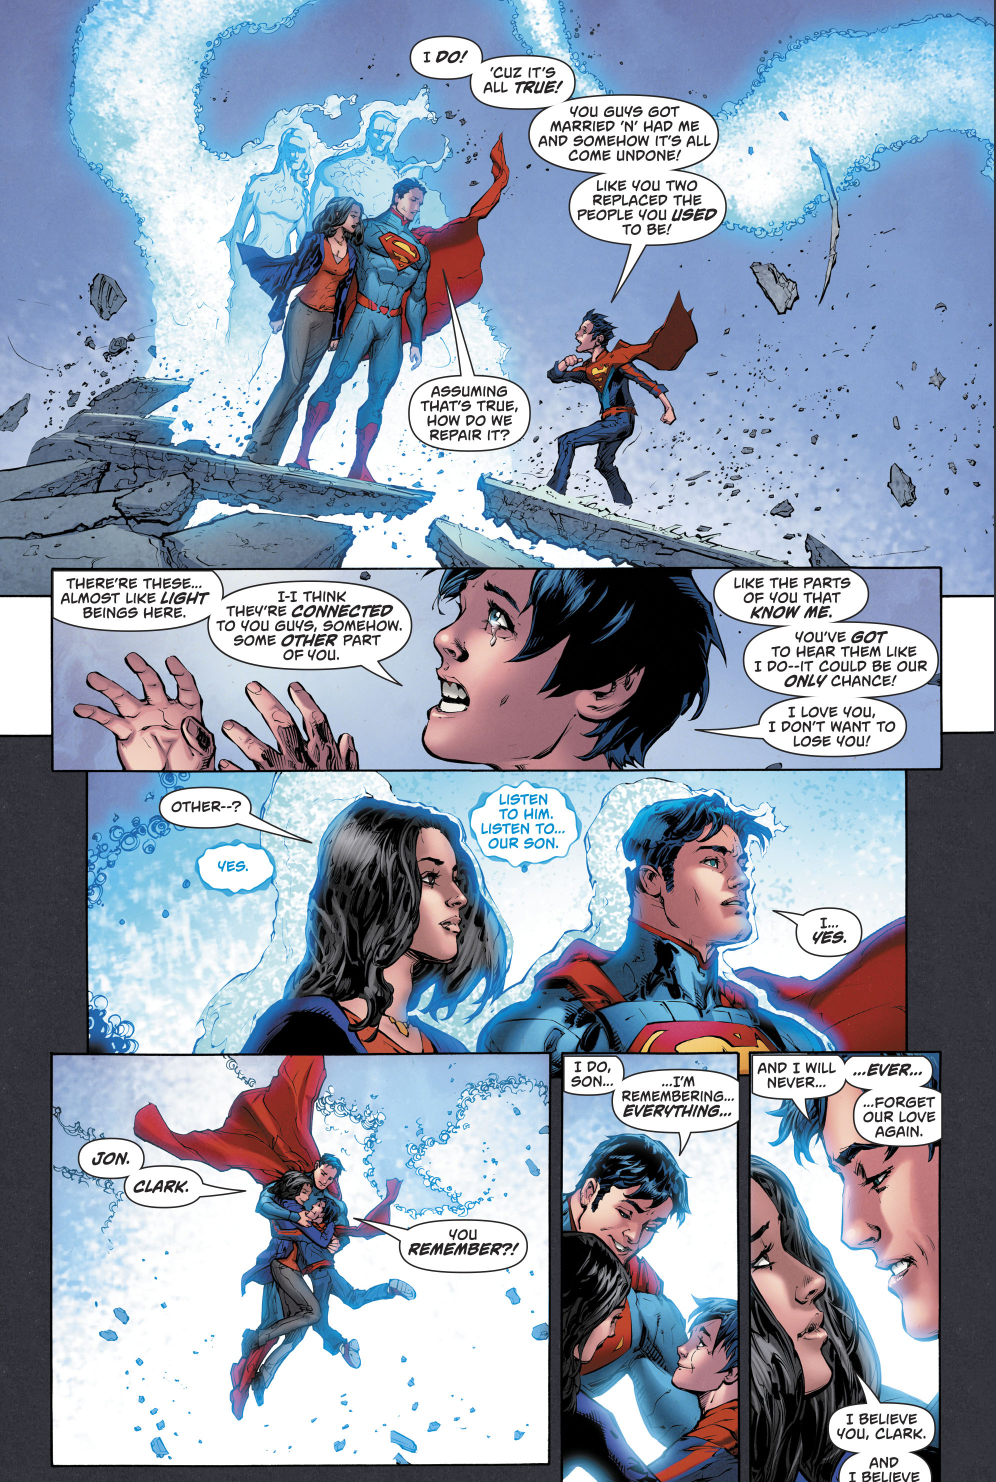 Superman And New 52 Superman Merge Into One 